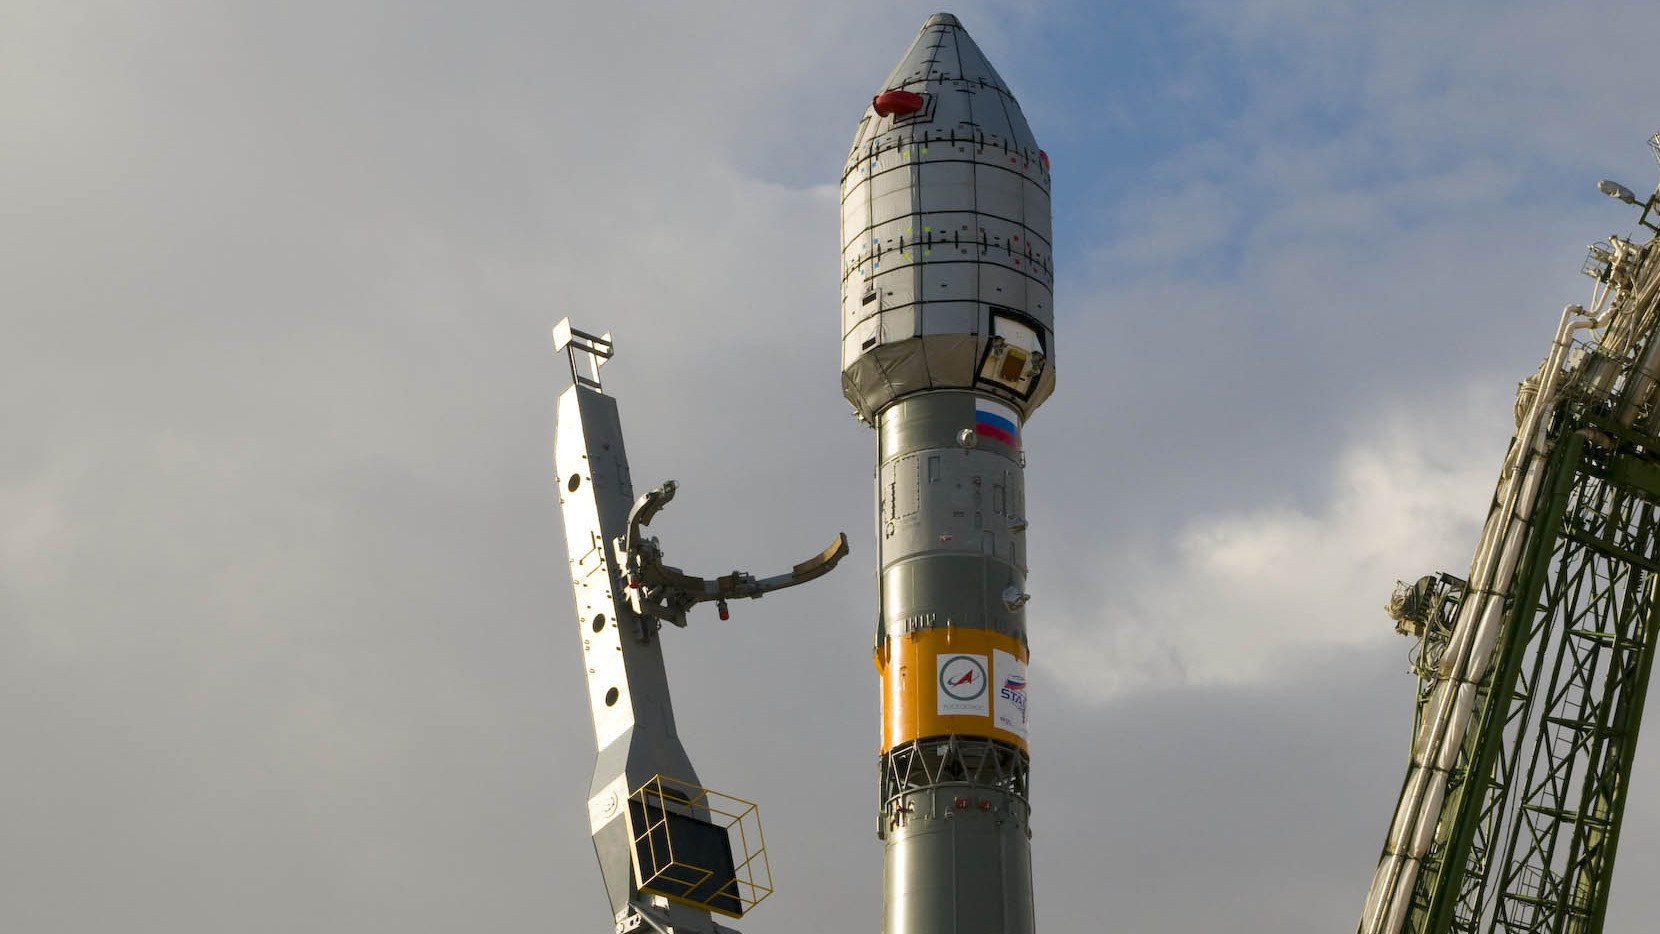 The Soyuz launch vehicle carrying GIOVE-B on the launch pad